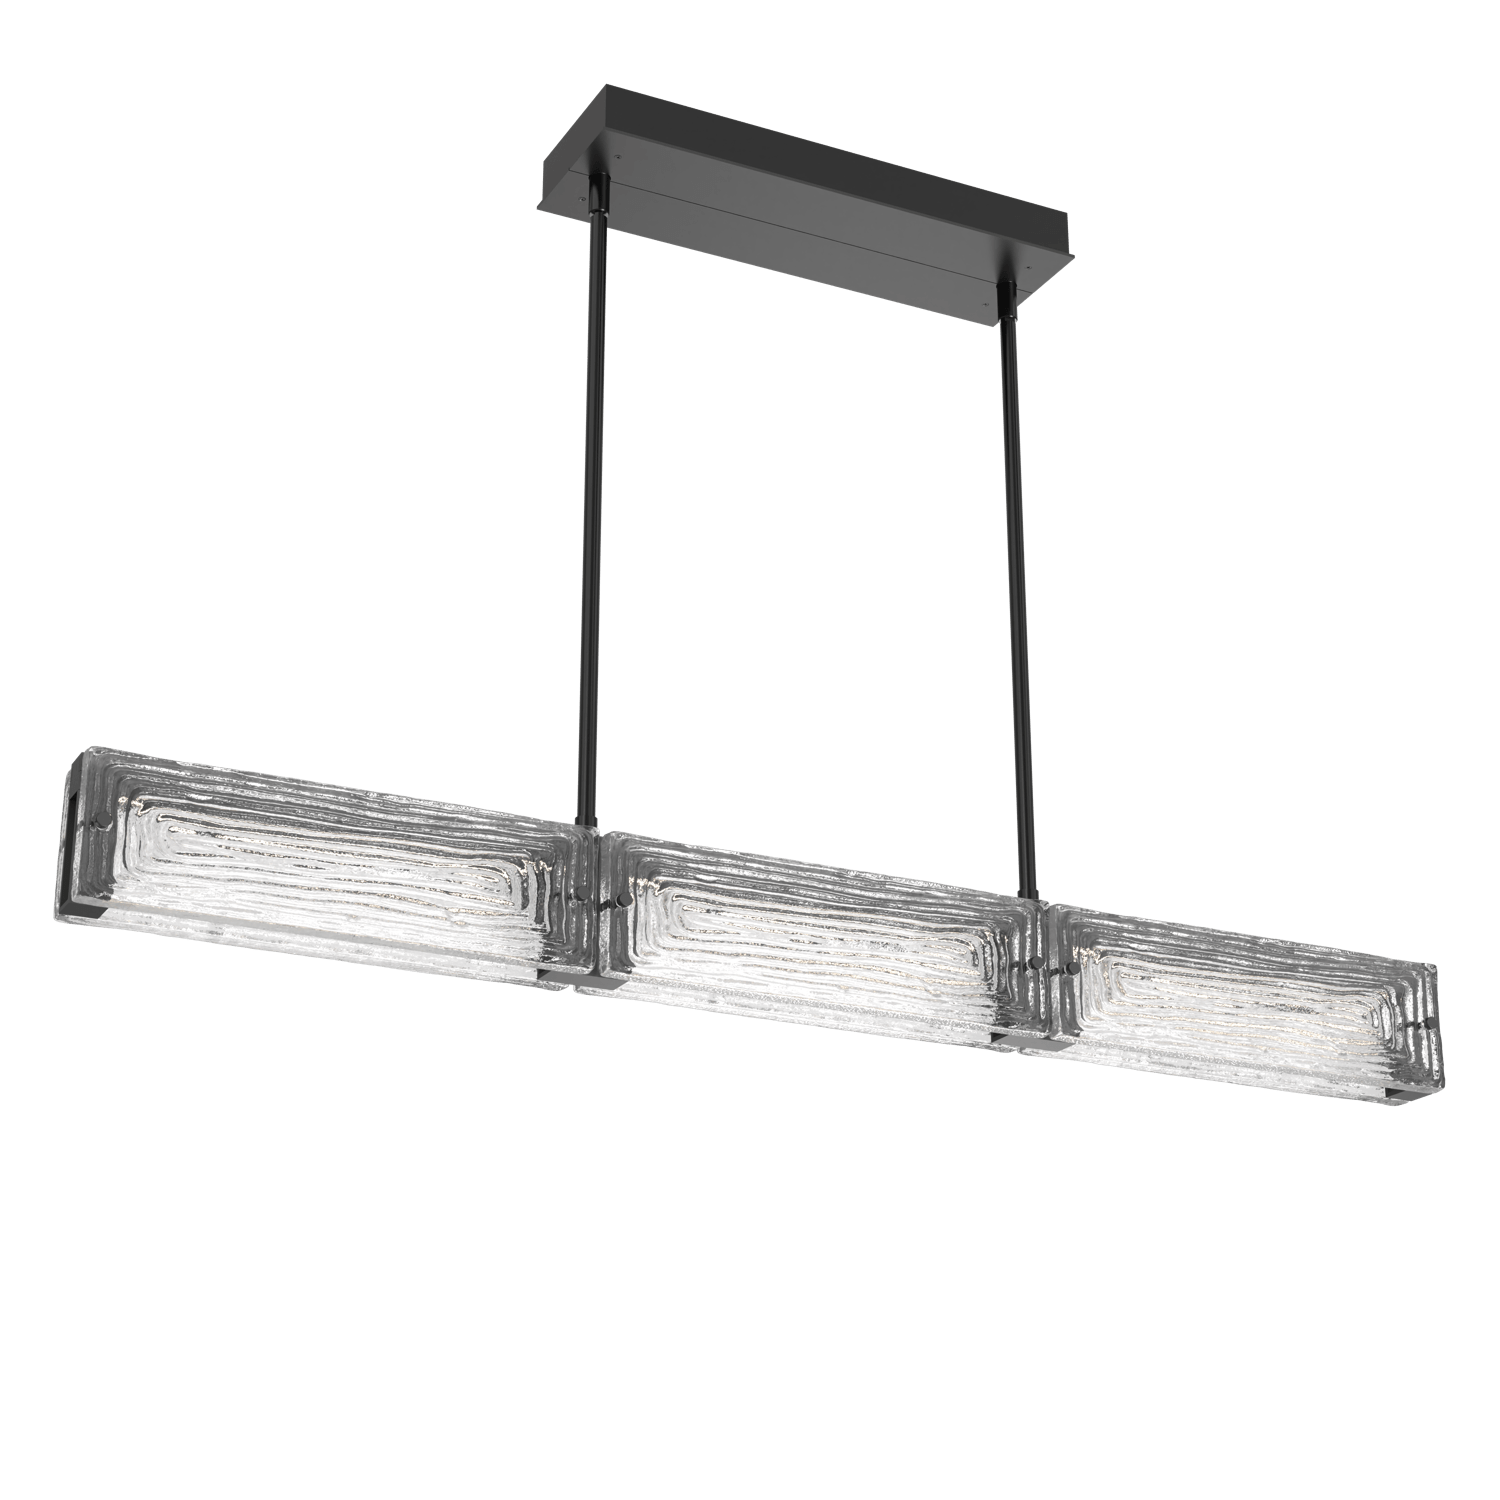 PLB0090-43-MB-TL-Hammerton-Studio-Tabulo-43-inch-linear-chandelier-with-matte-black-finish-and-clear-linea-cast-glass-shade-and-LED-lamping